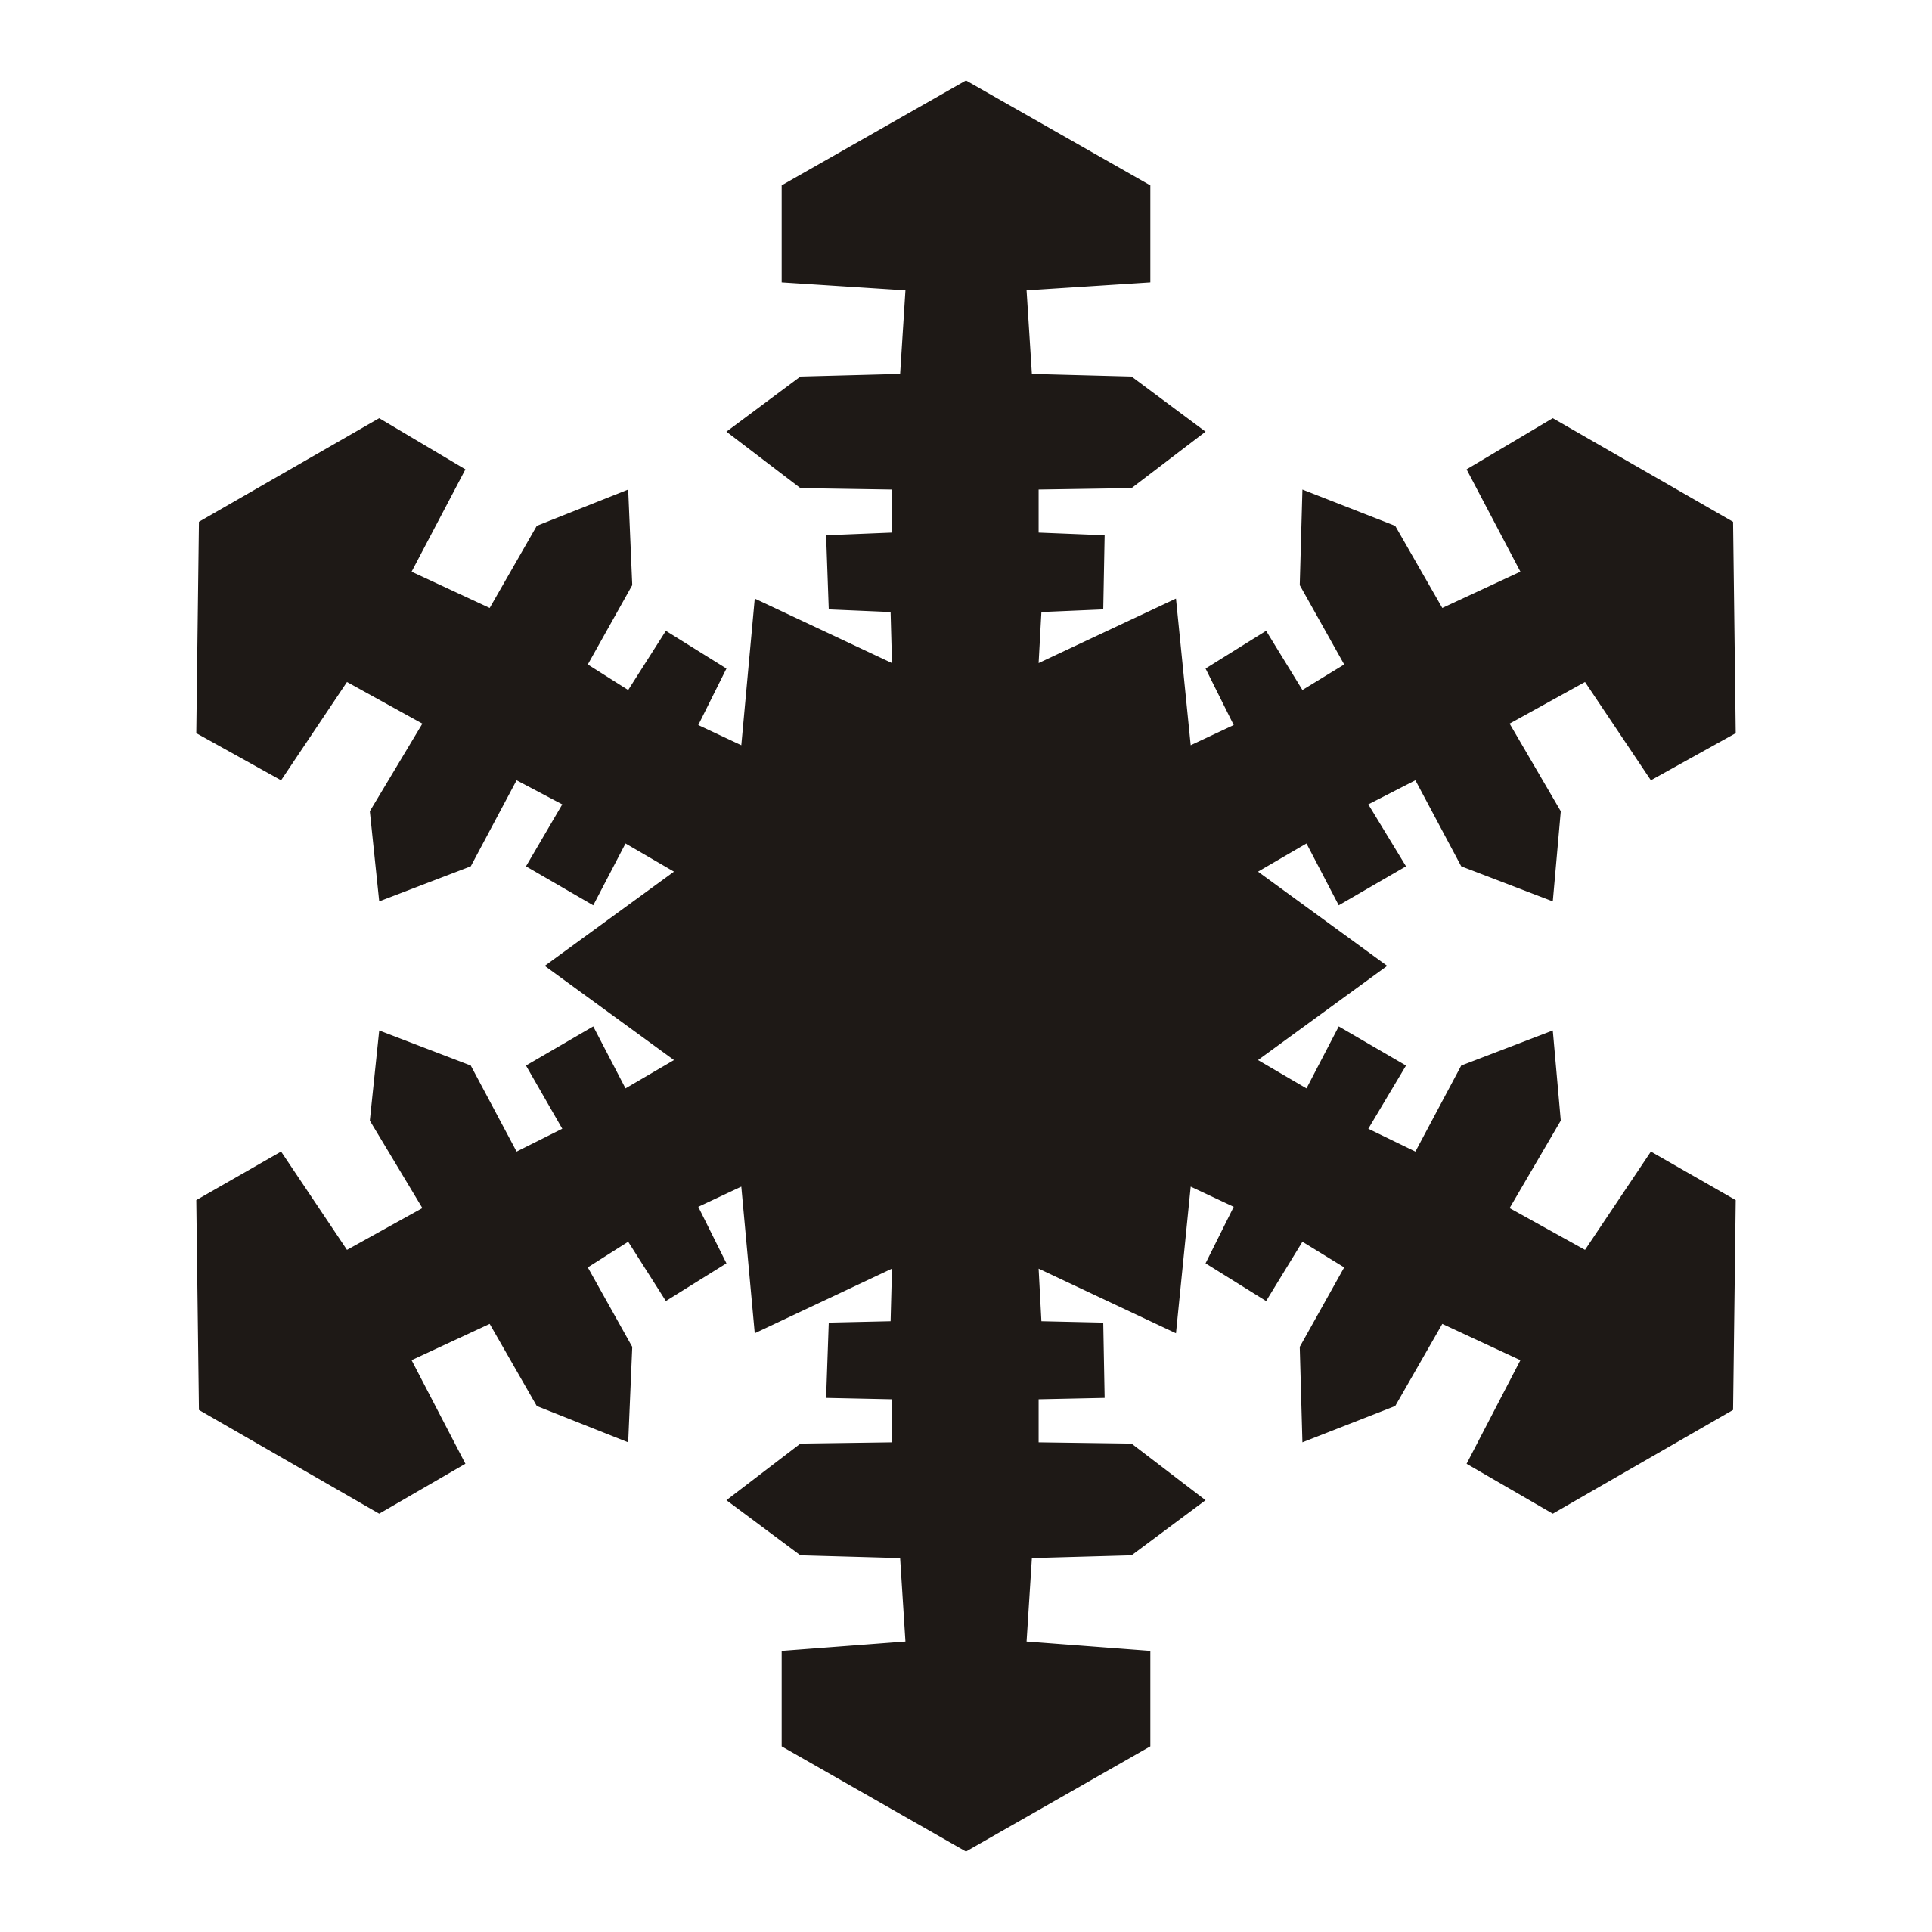 Black and white free. Snowflake clipart red